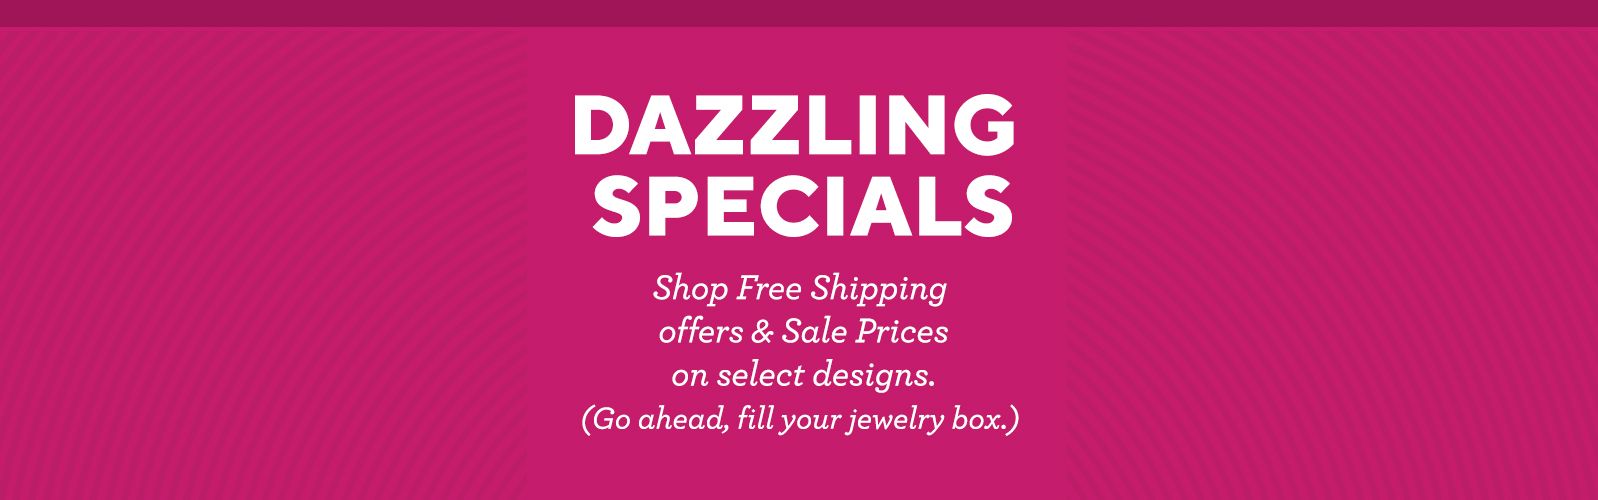 Dazzling Specials - Shop Free Shipping offers & Sale Prices on select designs. (Go ahead, fill your jewelry box.) 